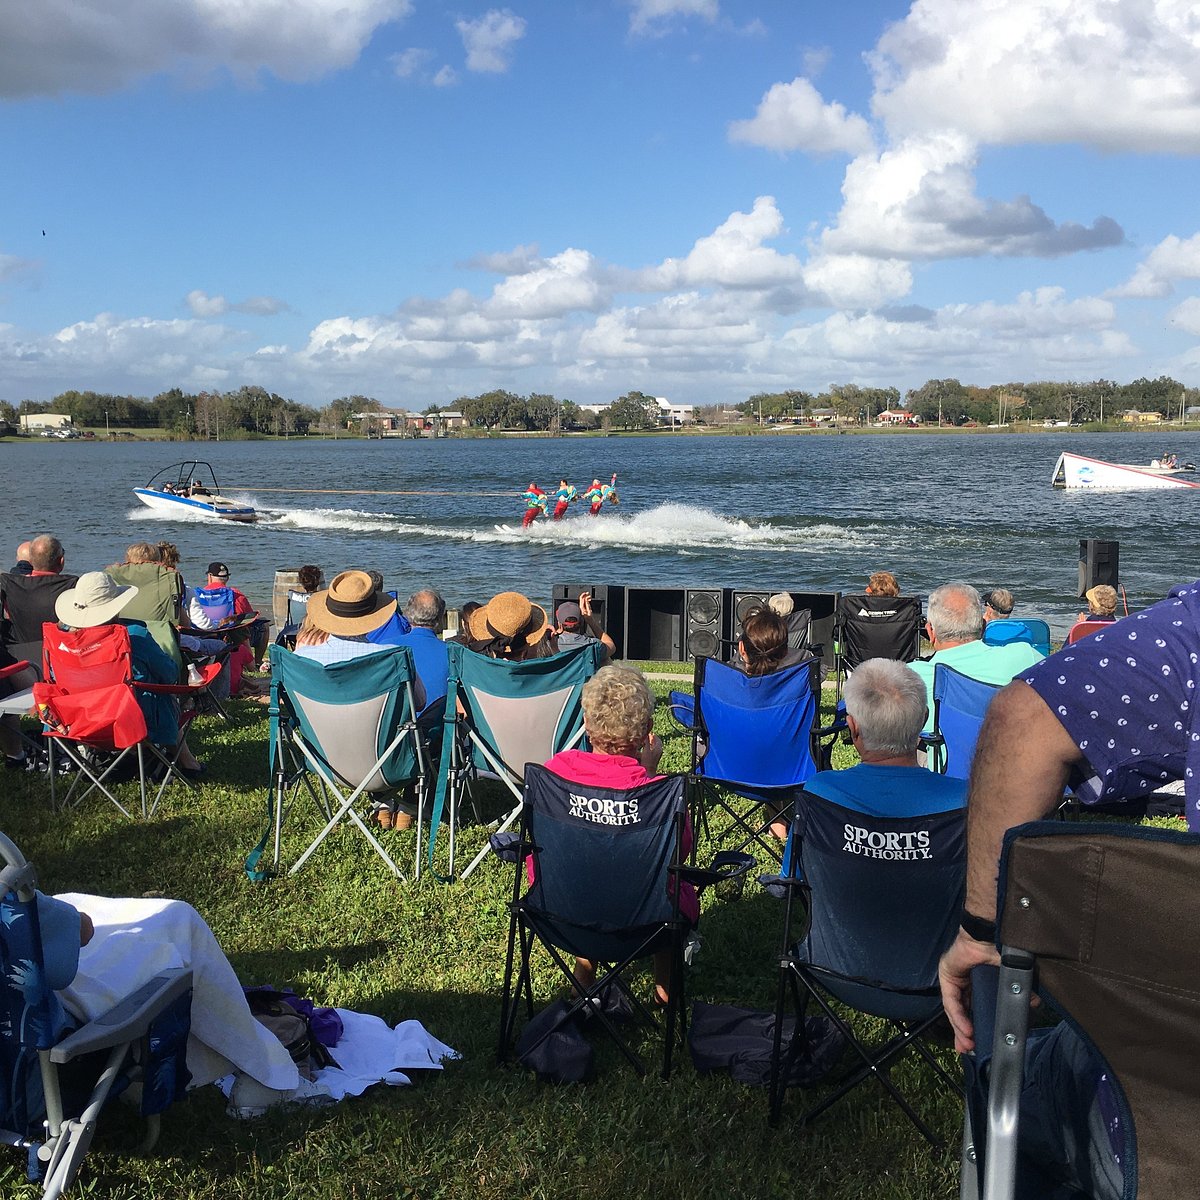 Cypress Gardens Waterski Show (Winter Haven) All You Need to Know